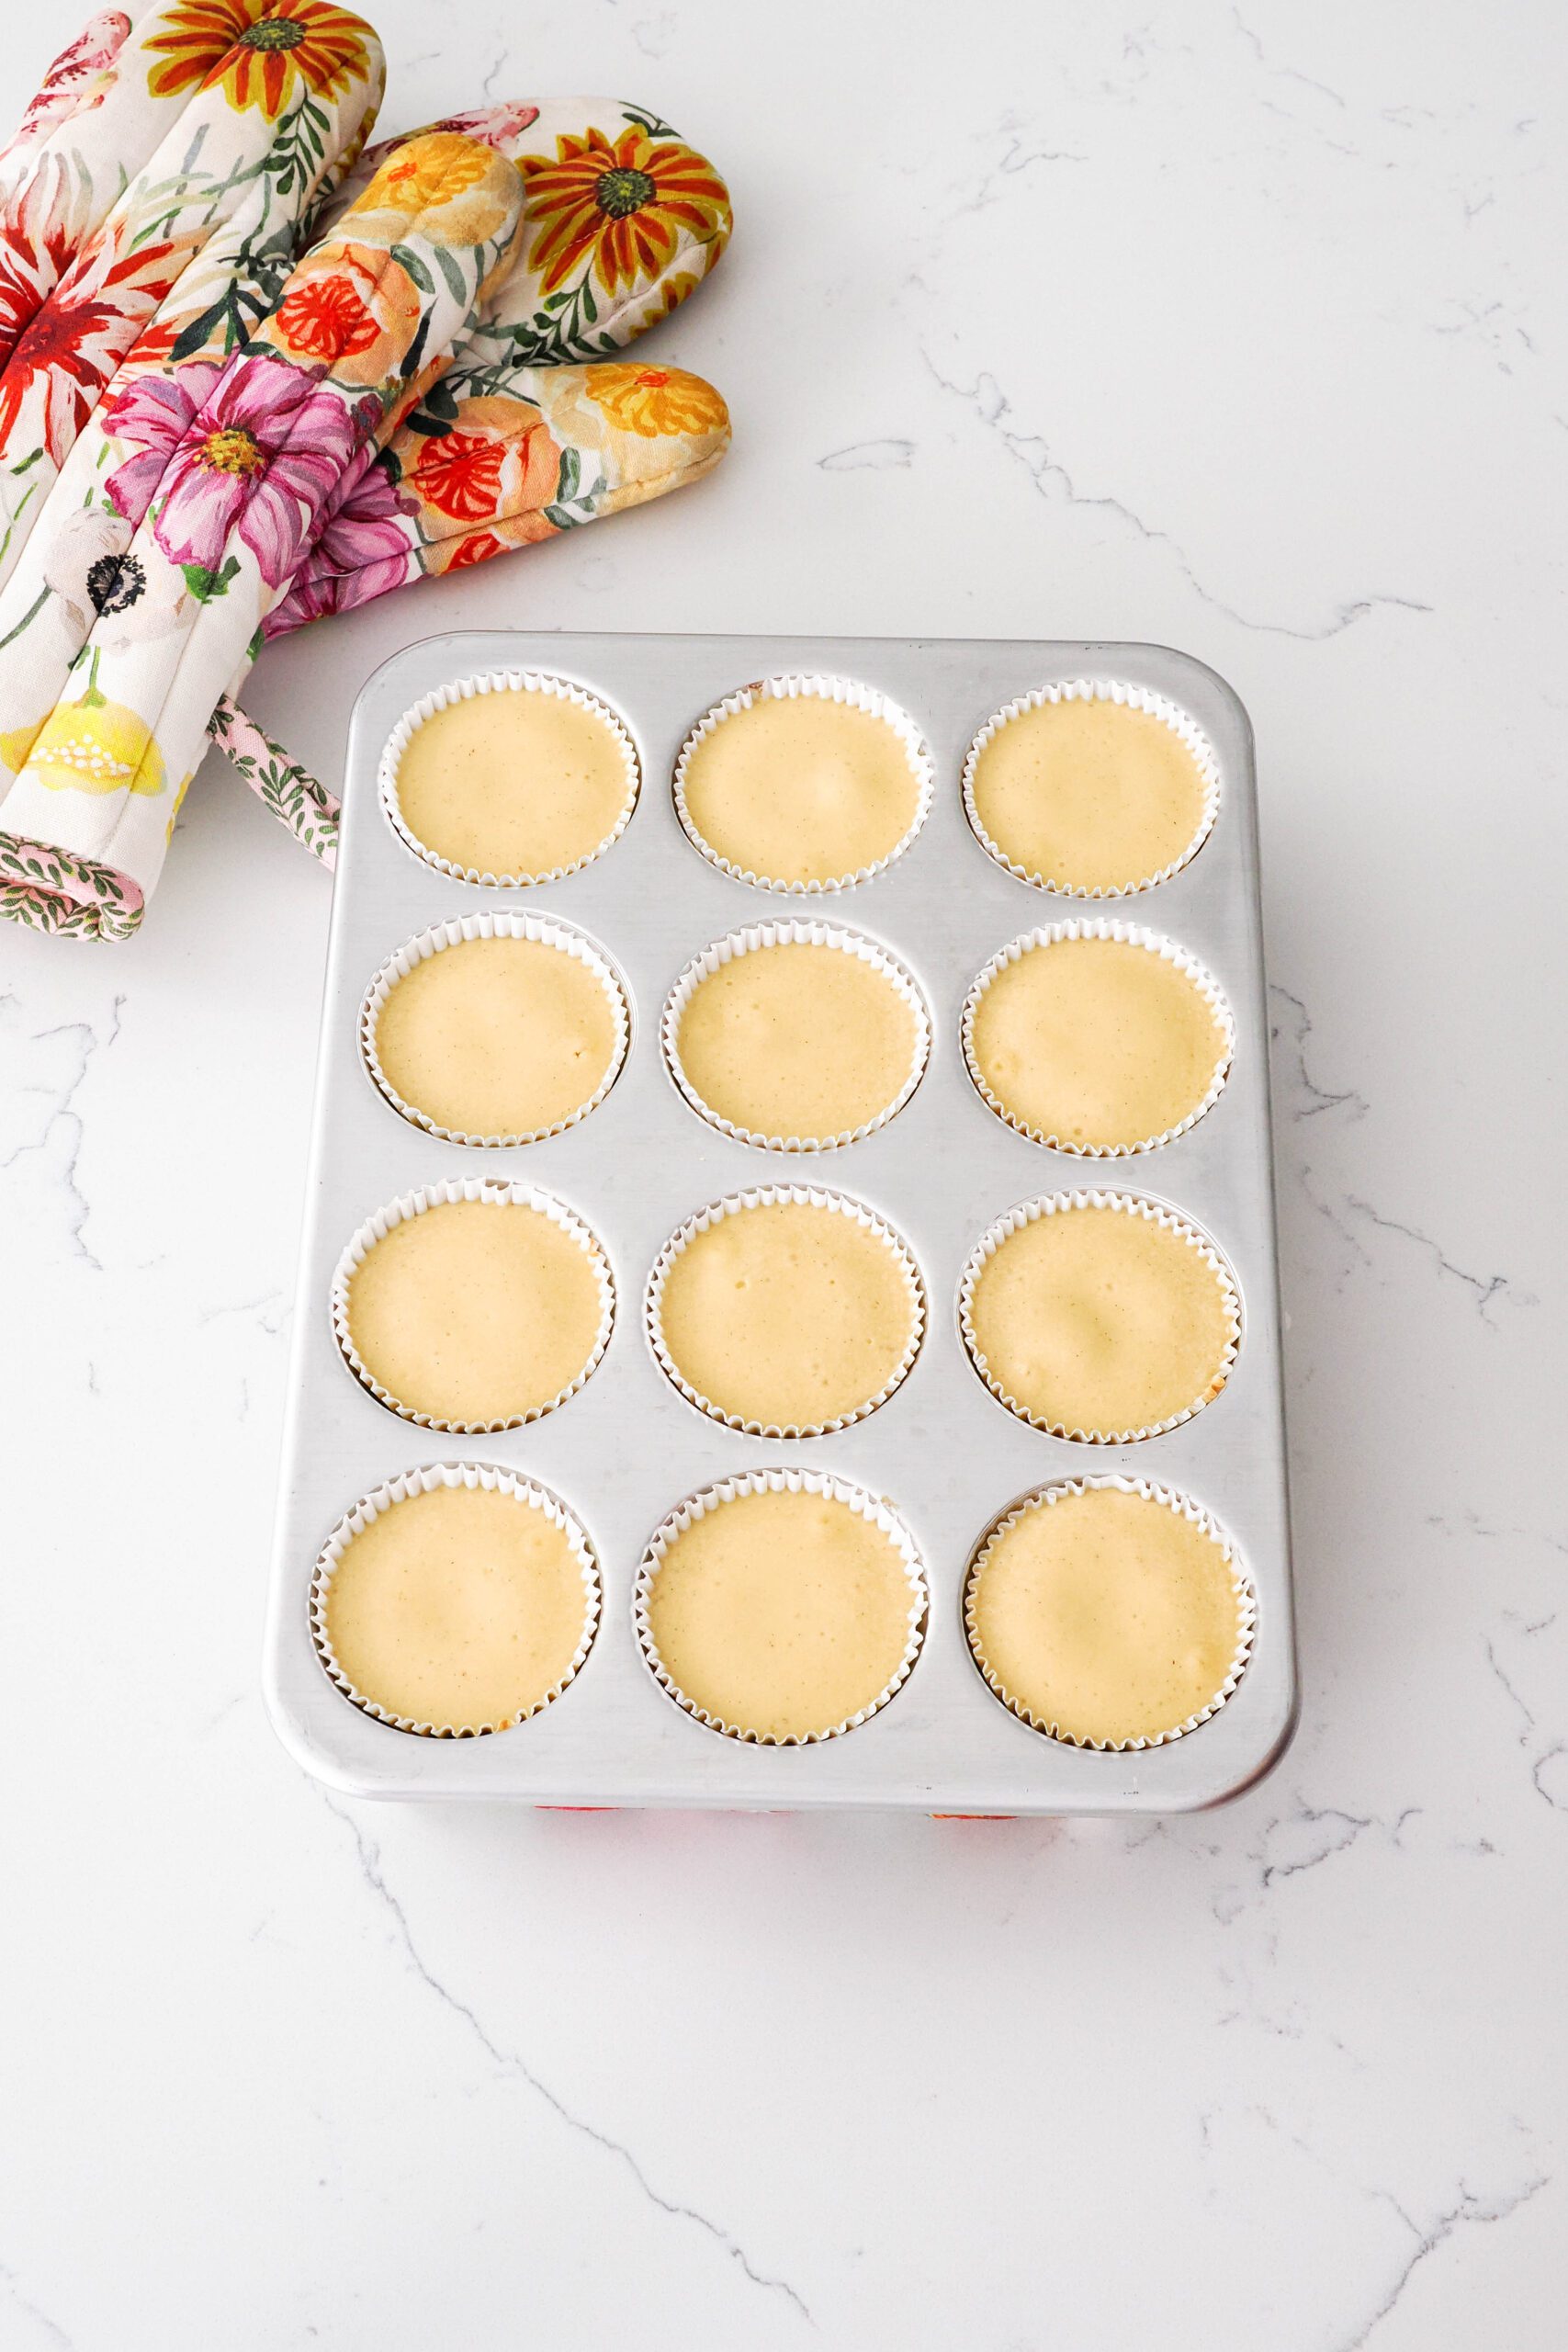 Baked caramel cheesecakes in a muffin pan on a quartz countertop.